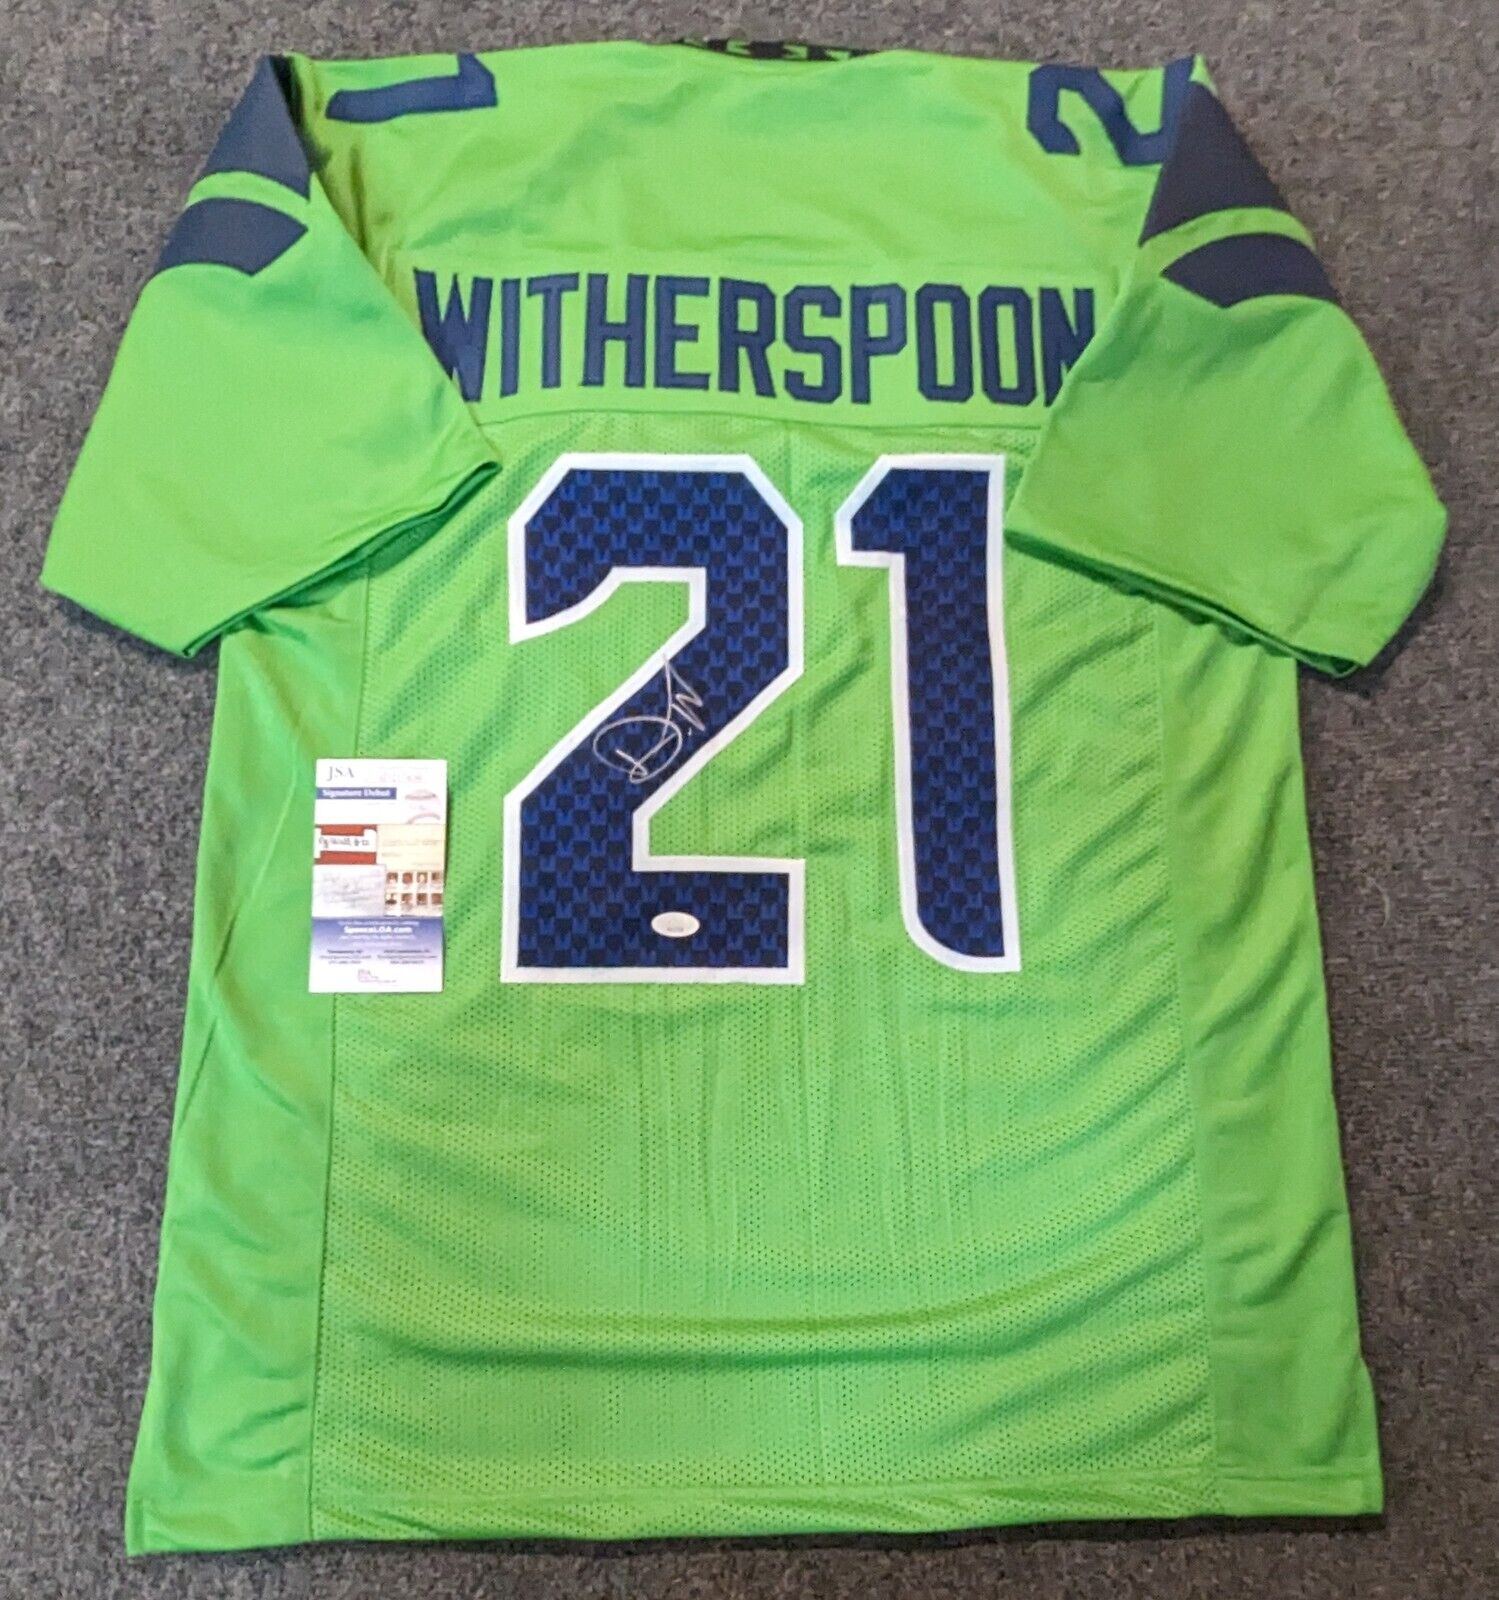 MVP Authentics Seattle Seahawks Devon Witherspoon Autographed Signed Jersey Jsa Coa 179.10 sports jersey framing , jersey framing